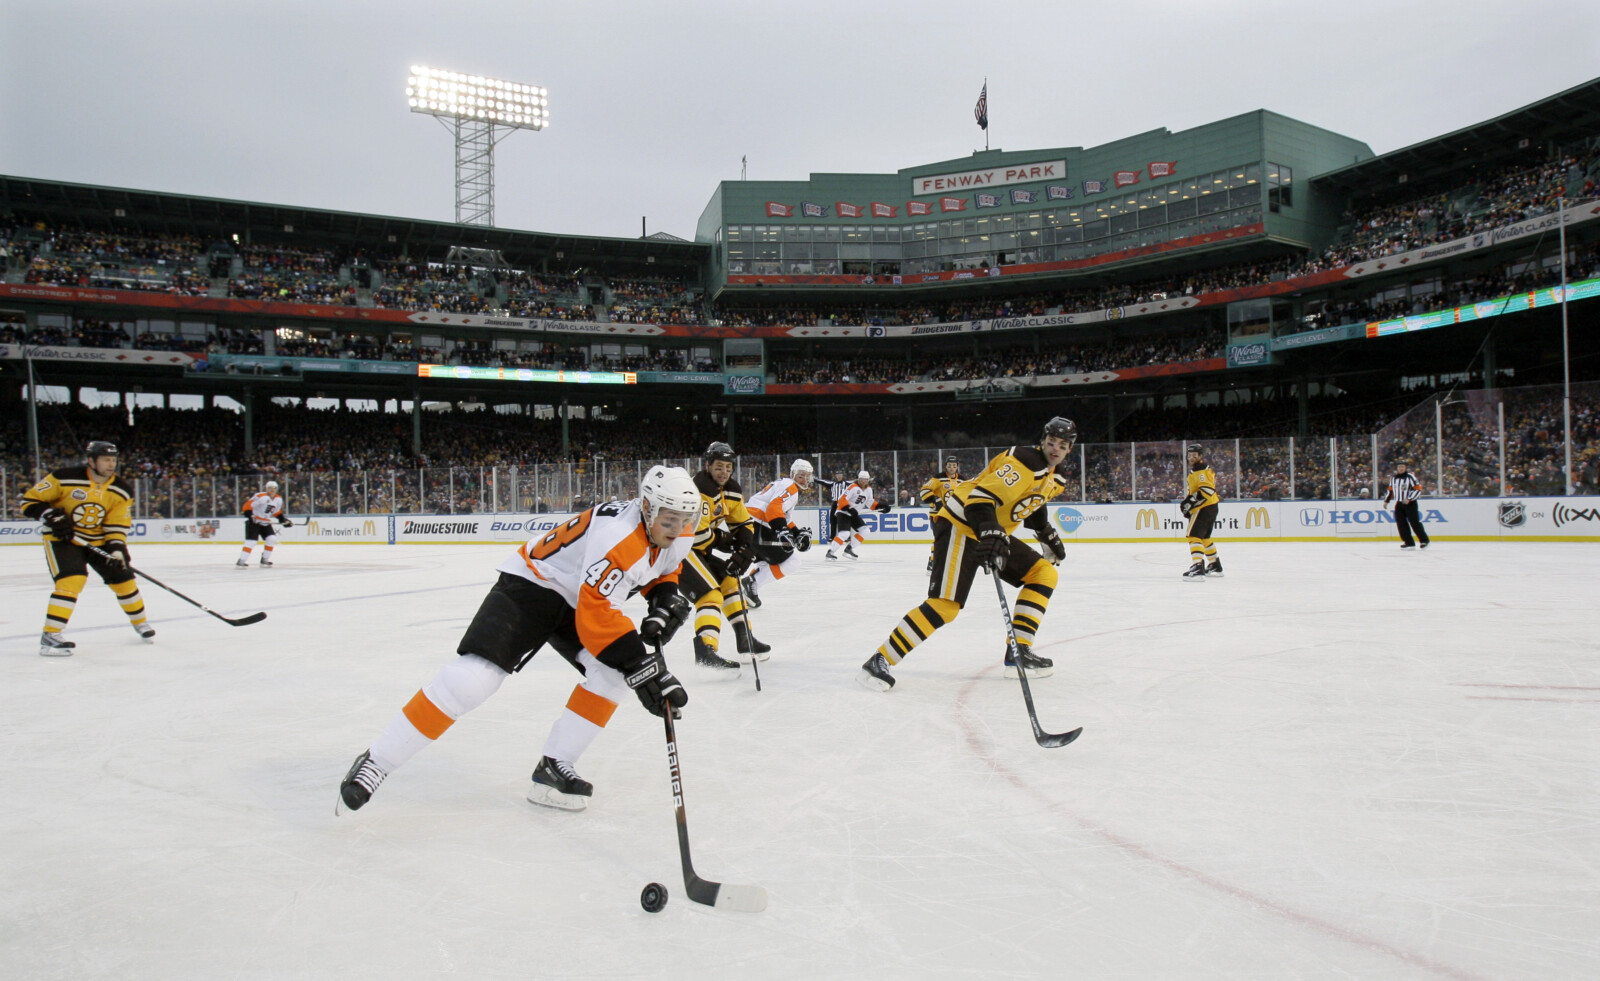 NHL's Winter Classic a hit at Fenway Park